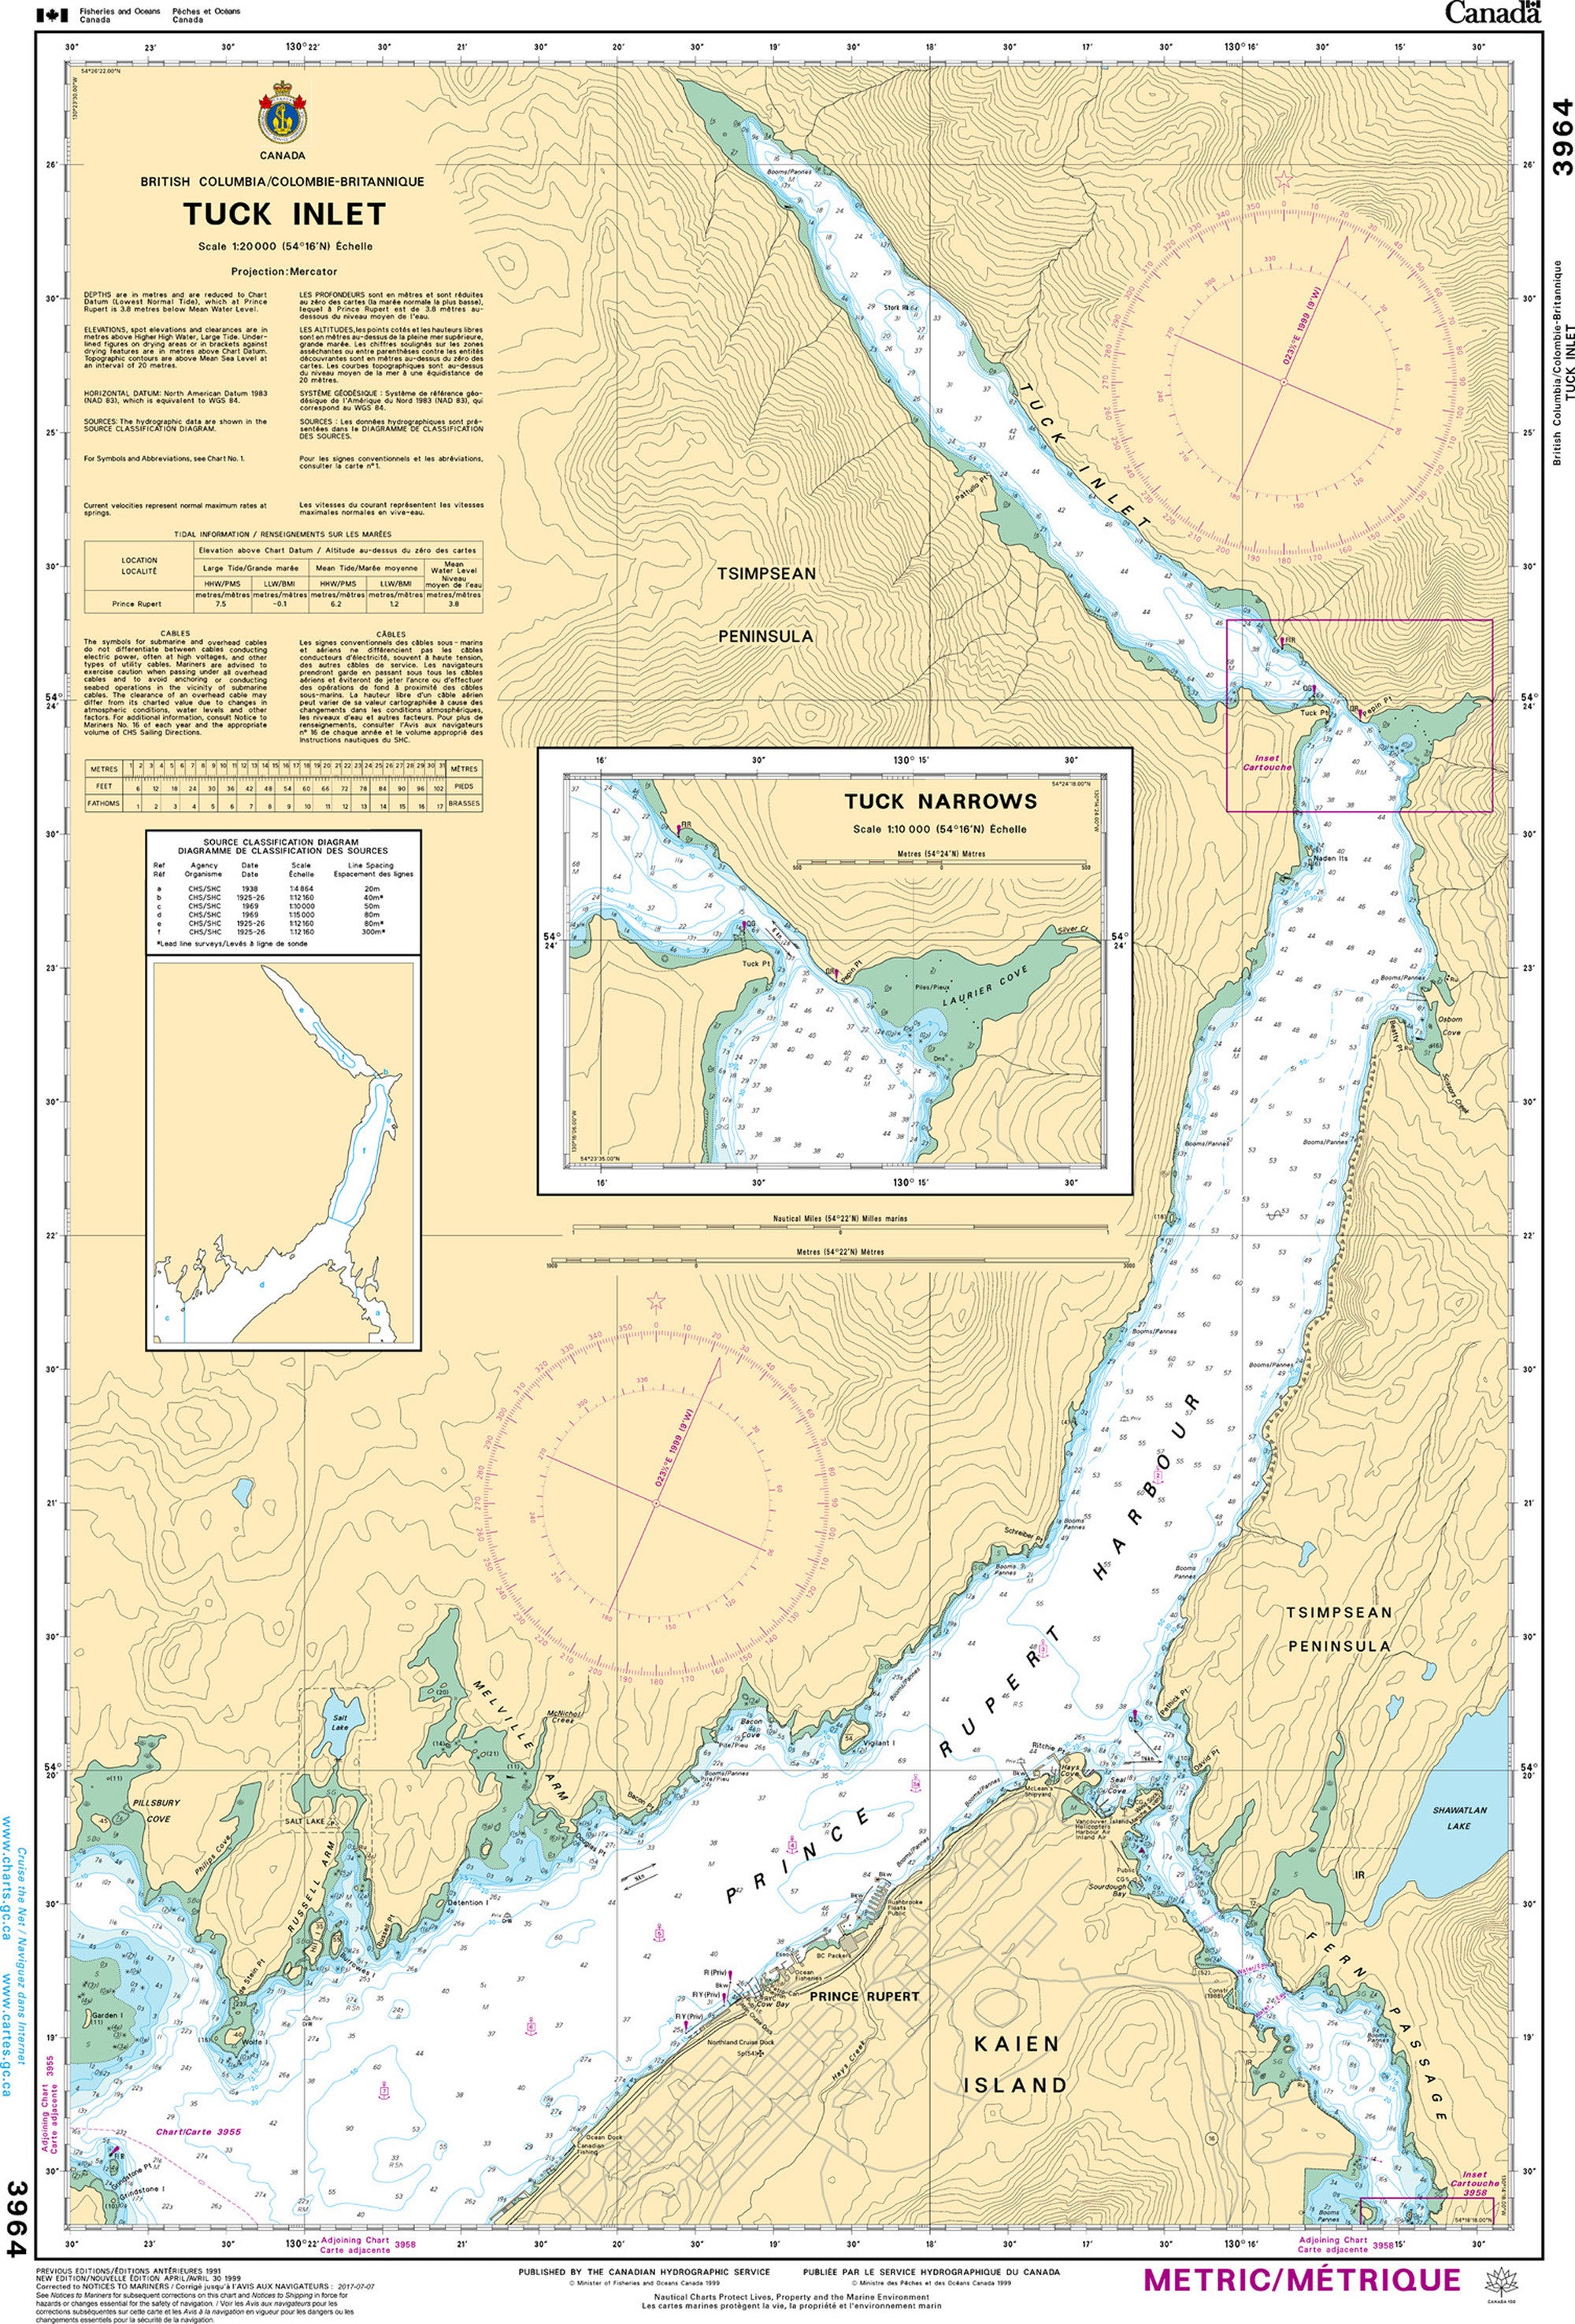 Canadian Hydrographic Service Nautical Chart CHS3964: Tuck Inlet